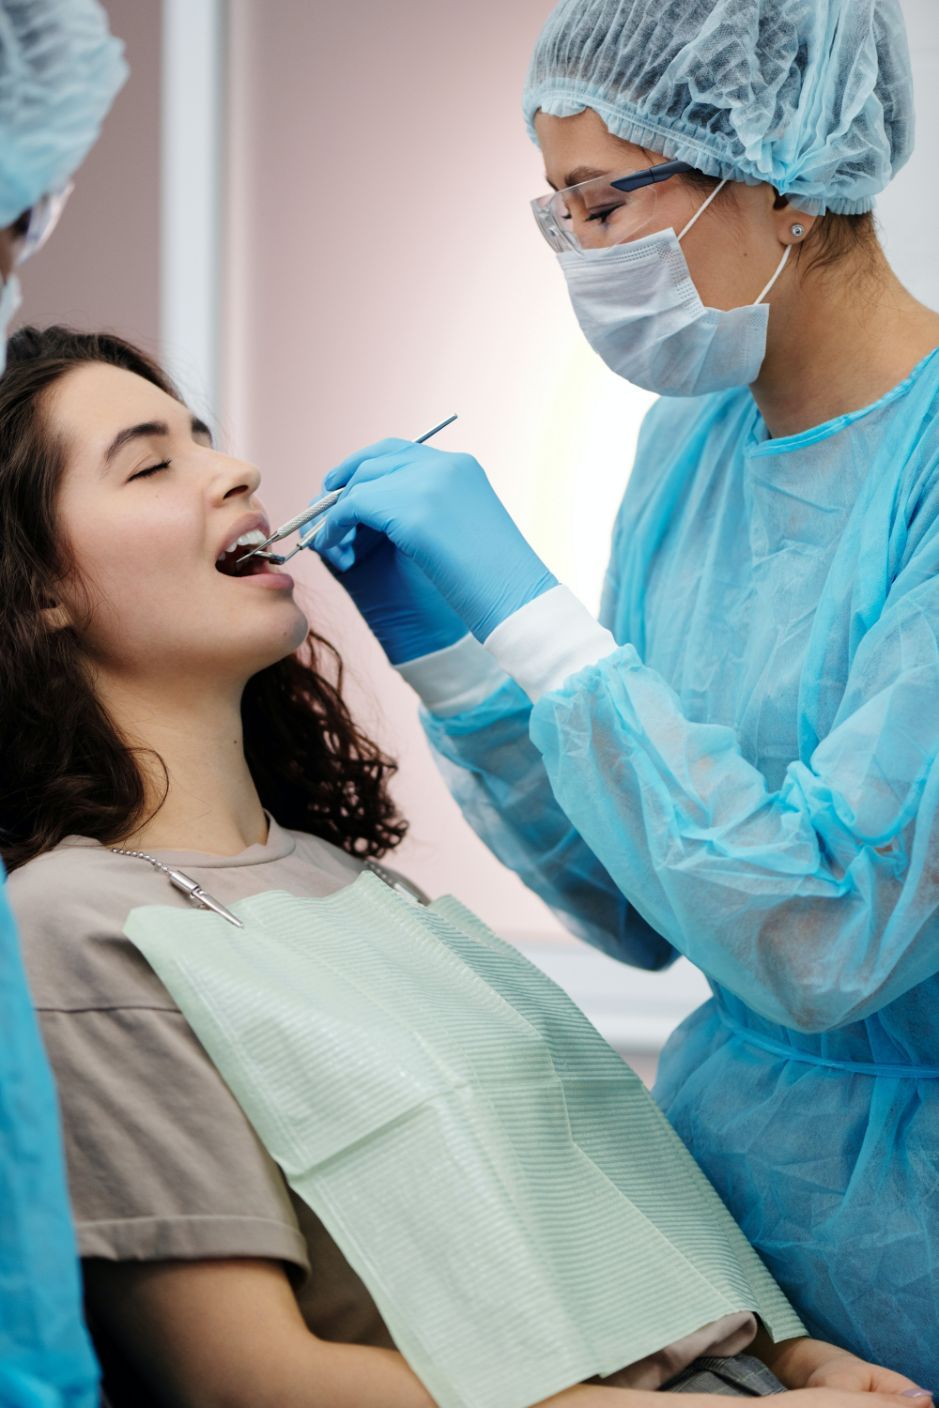 Dentist Examining Patient's Teeth — Dentistry Services in Cairns, QLD